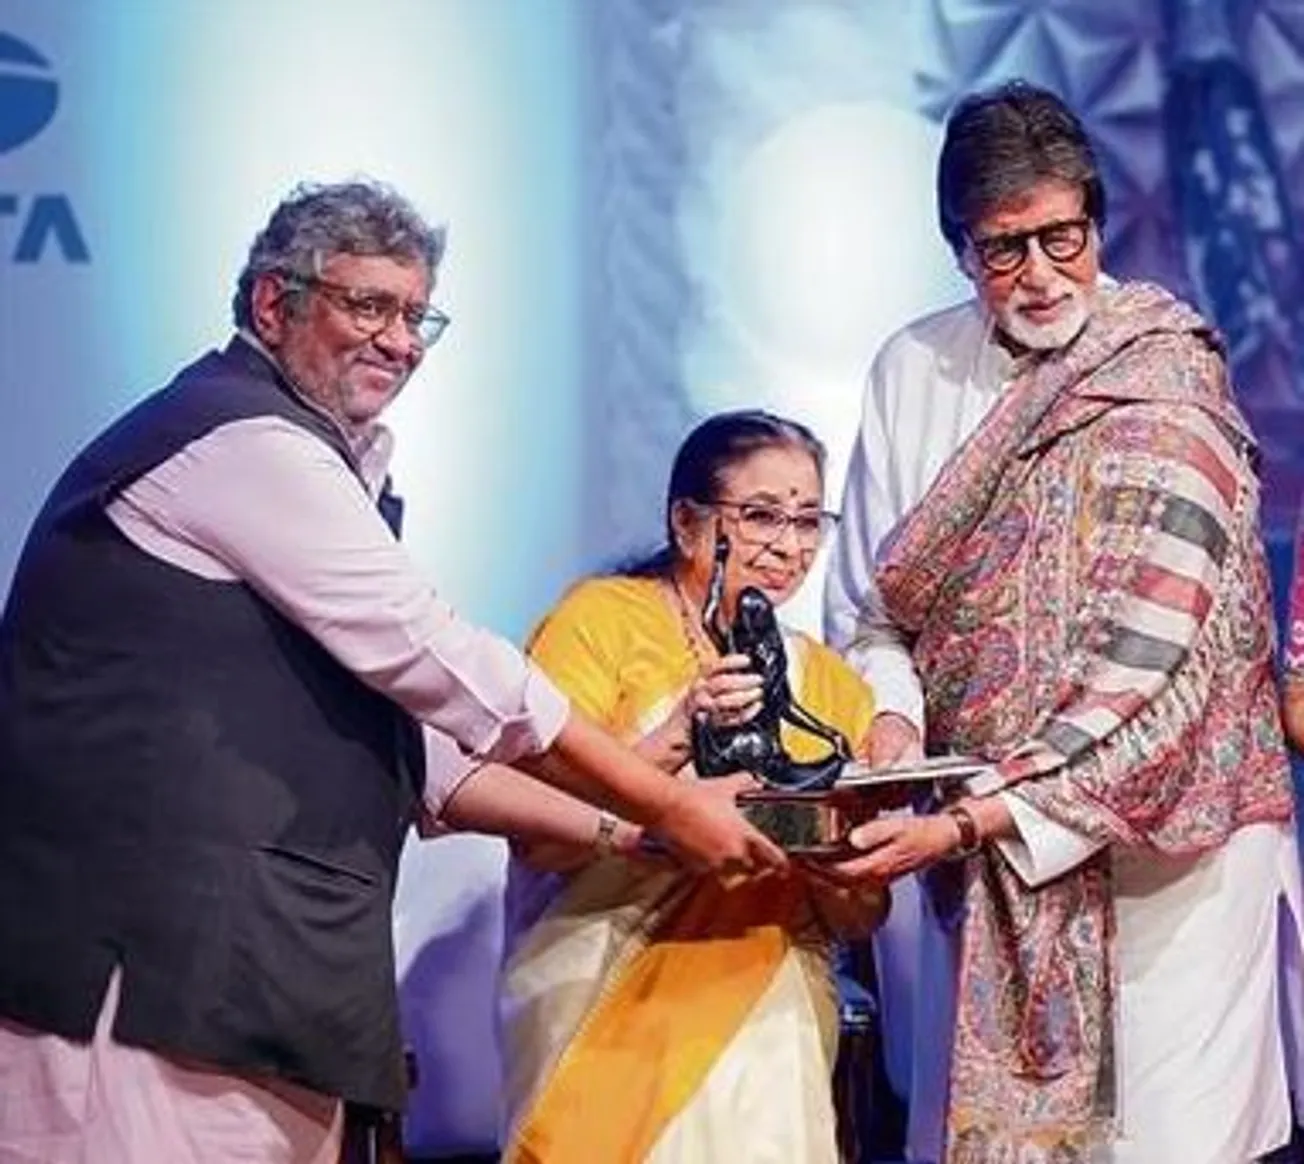 Amitabh says that once he asked his father Harivansh Rai Bachchan to tell him something about Lata ji,